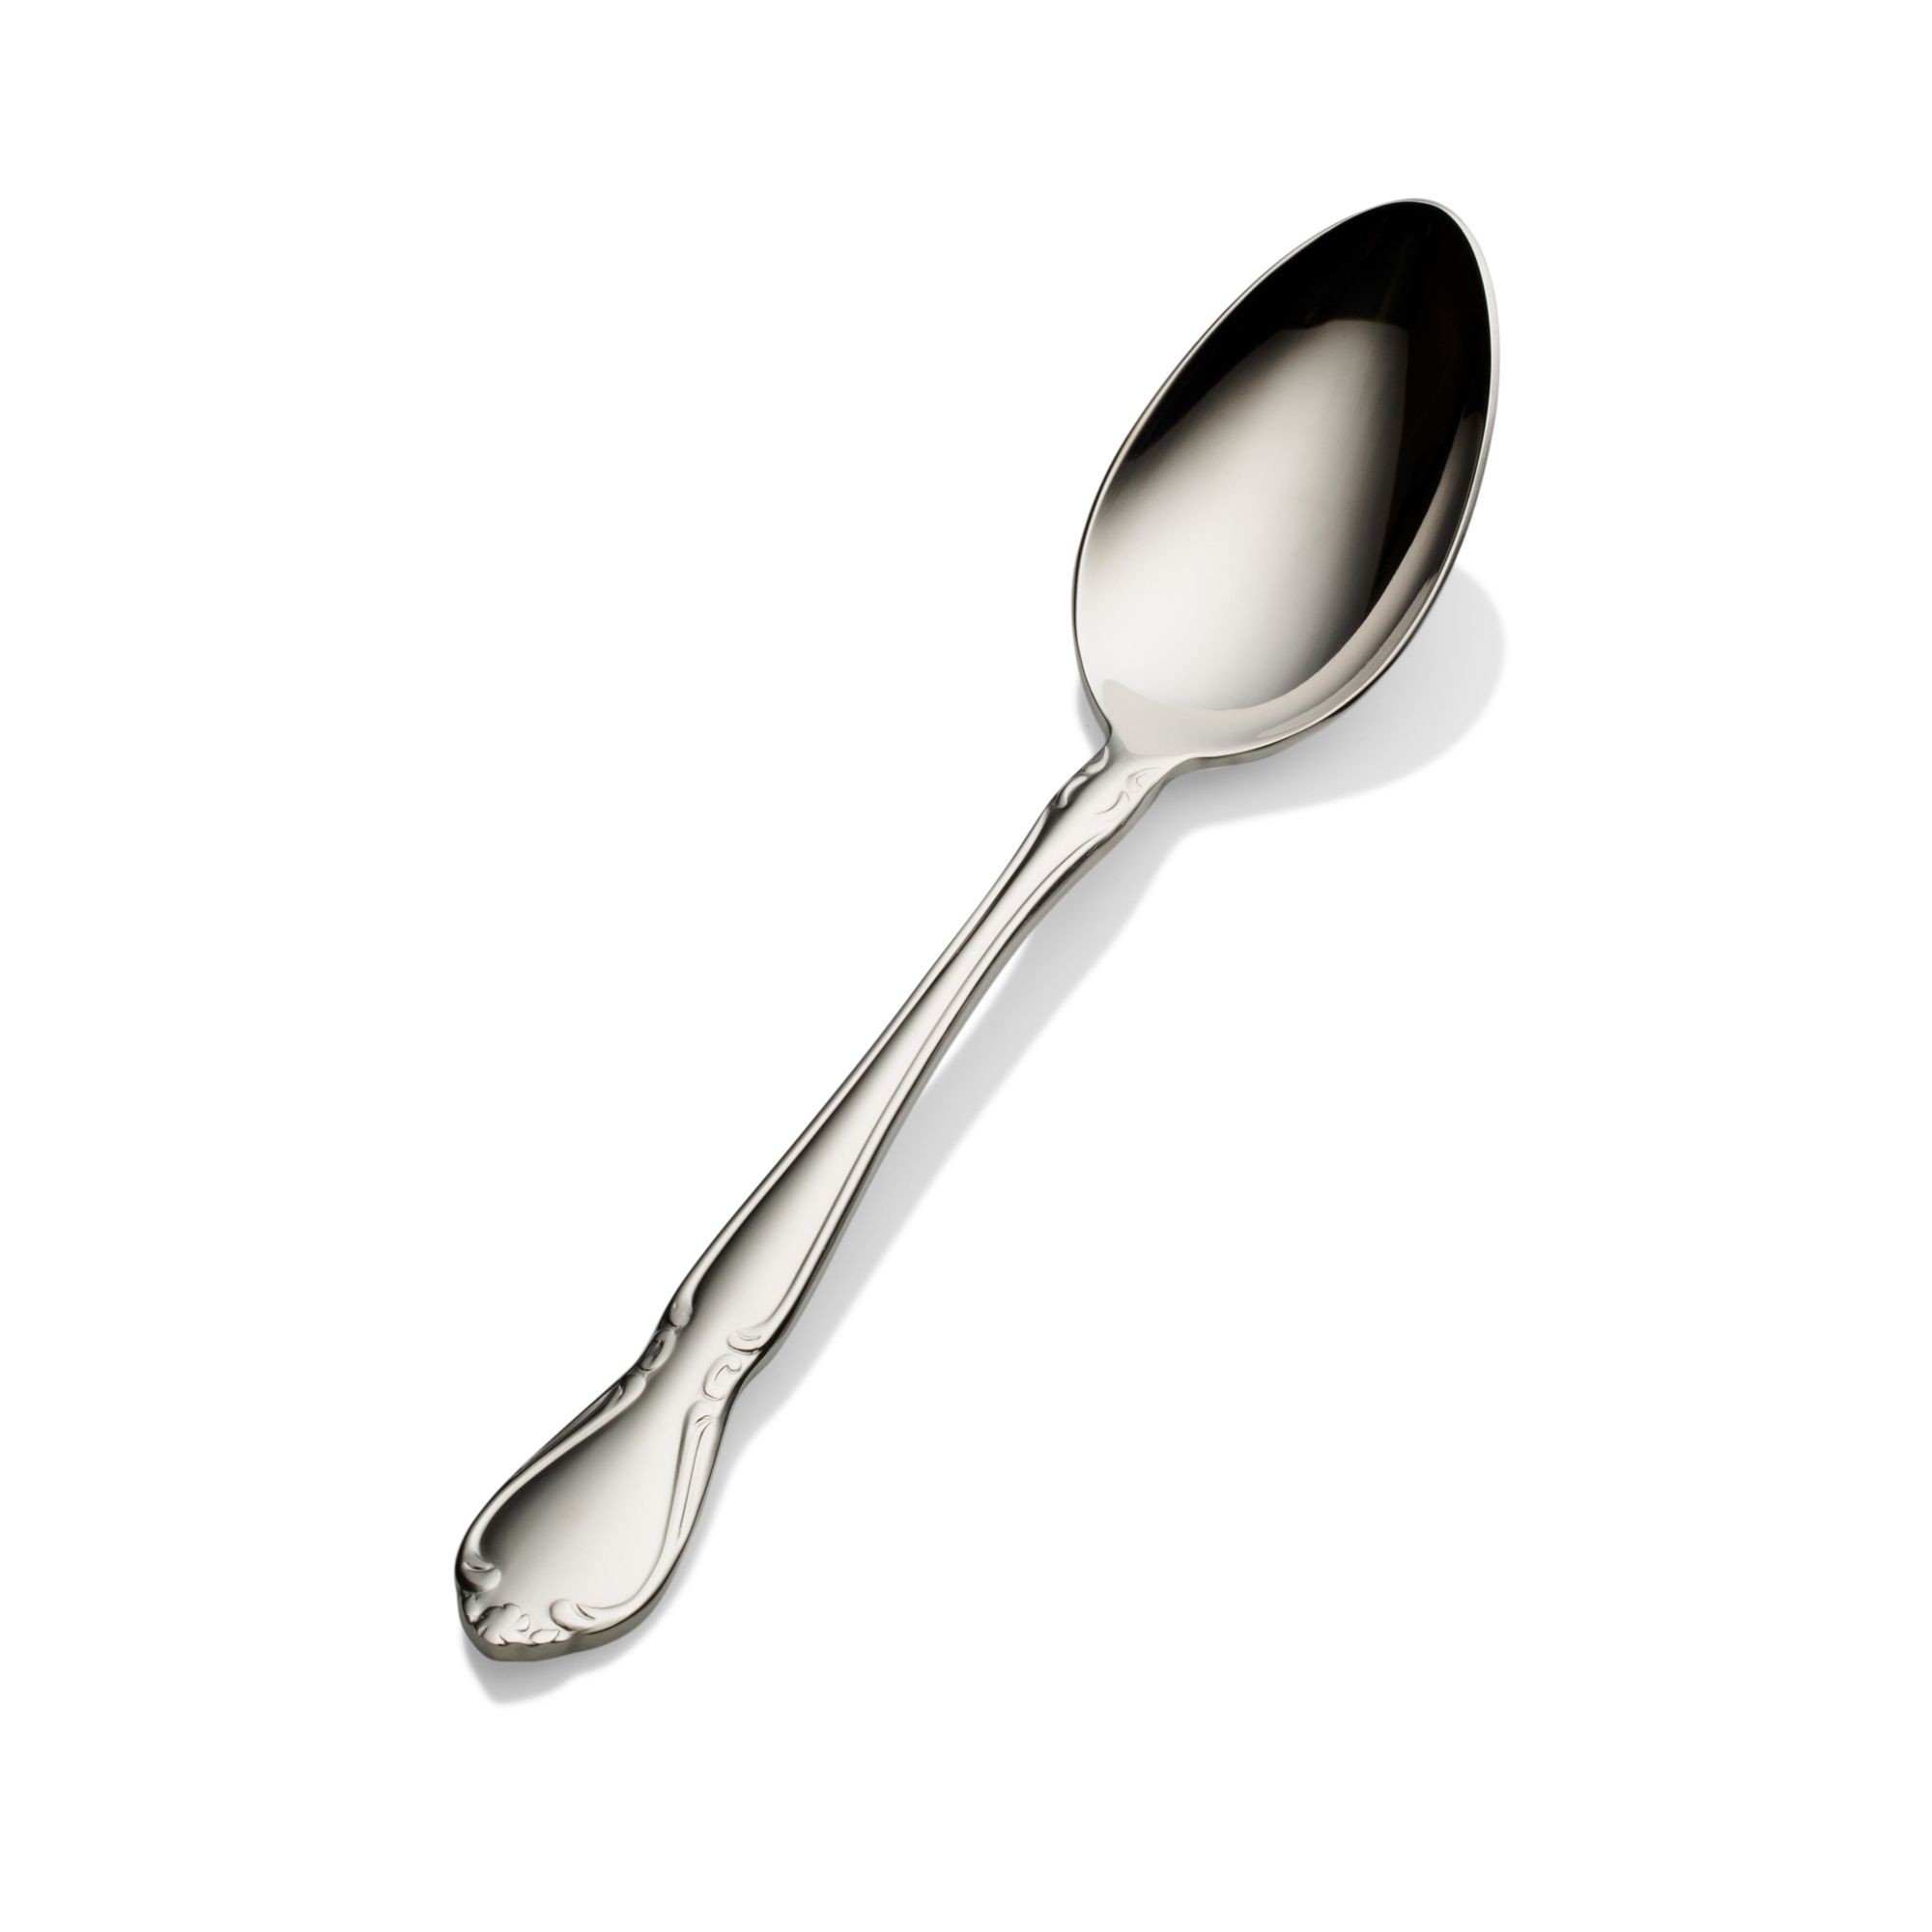 Bon Chef S1803 Queen Anne 18/8 Stainless Steel Soup and Dessert Spoon